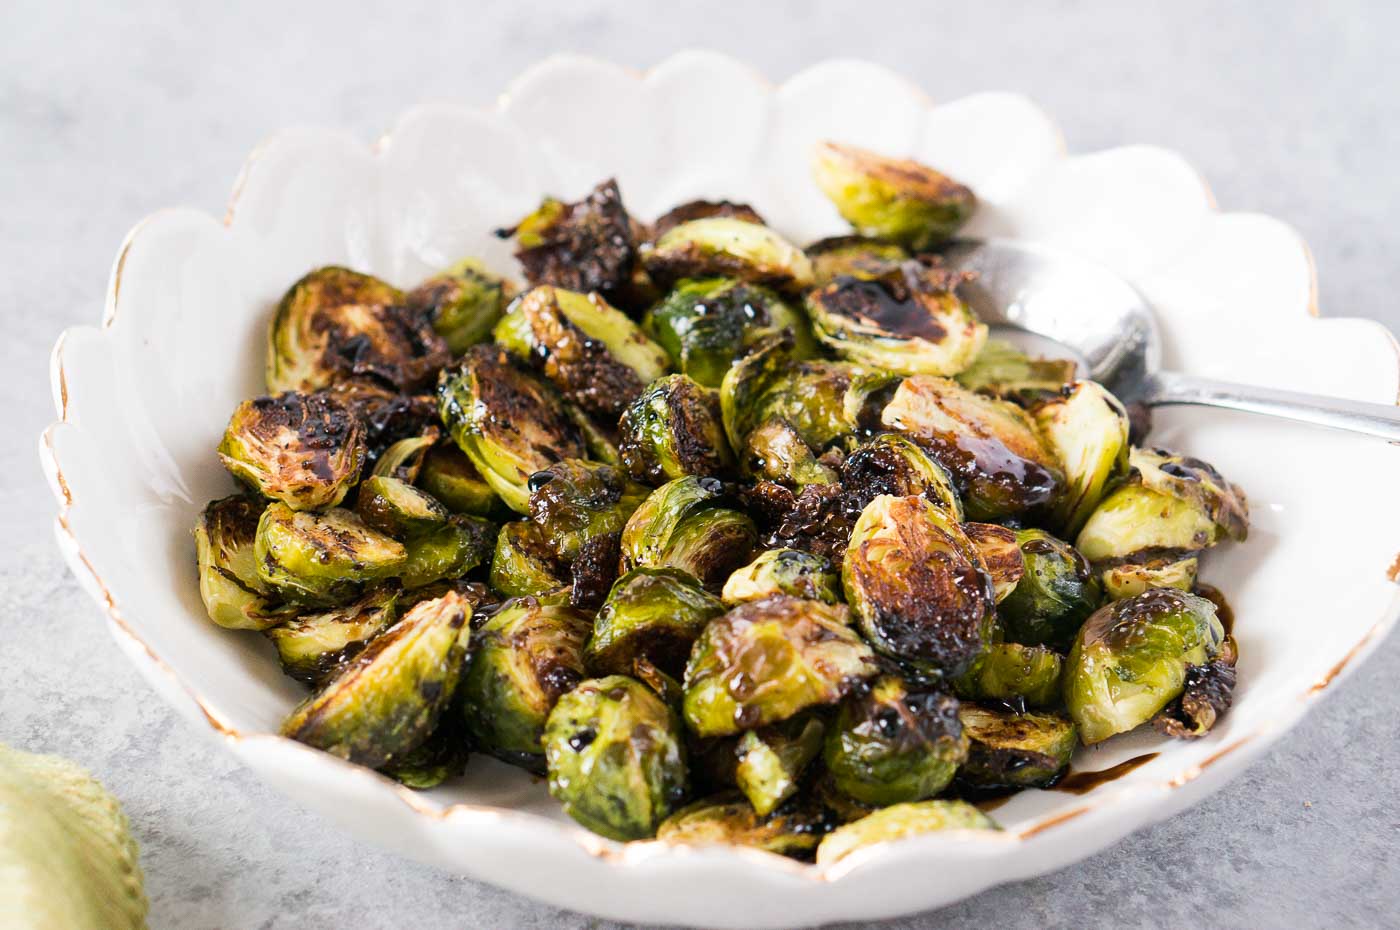 oven roasted Brussel sprouts with balsamic honey vinaigrette in a bowl